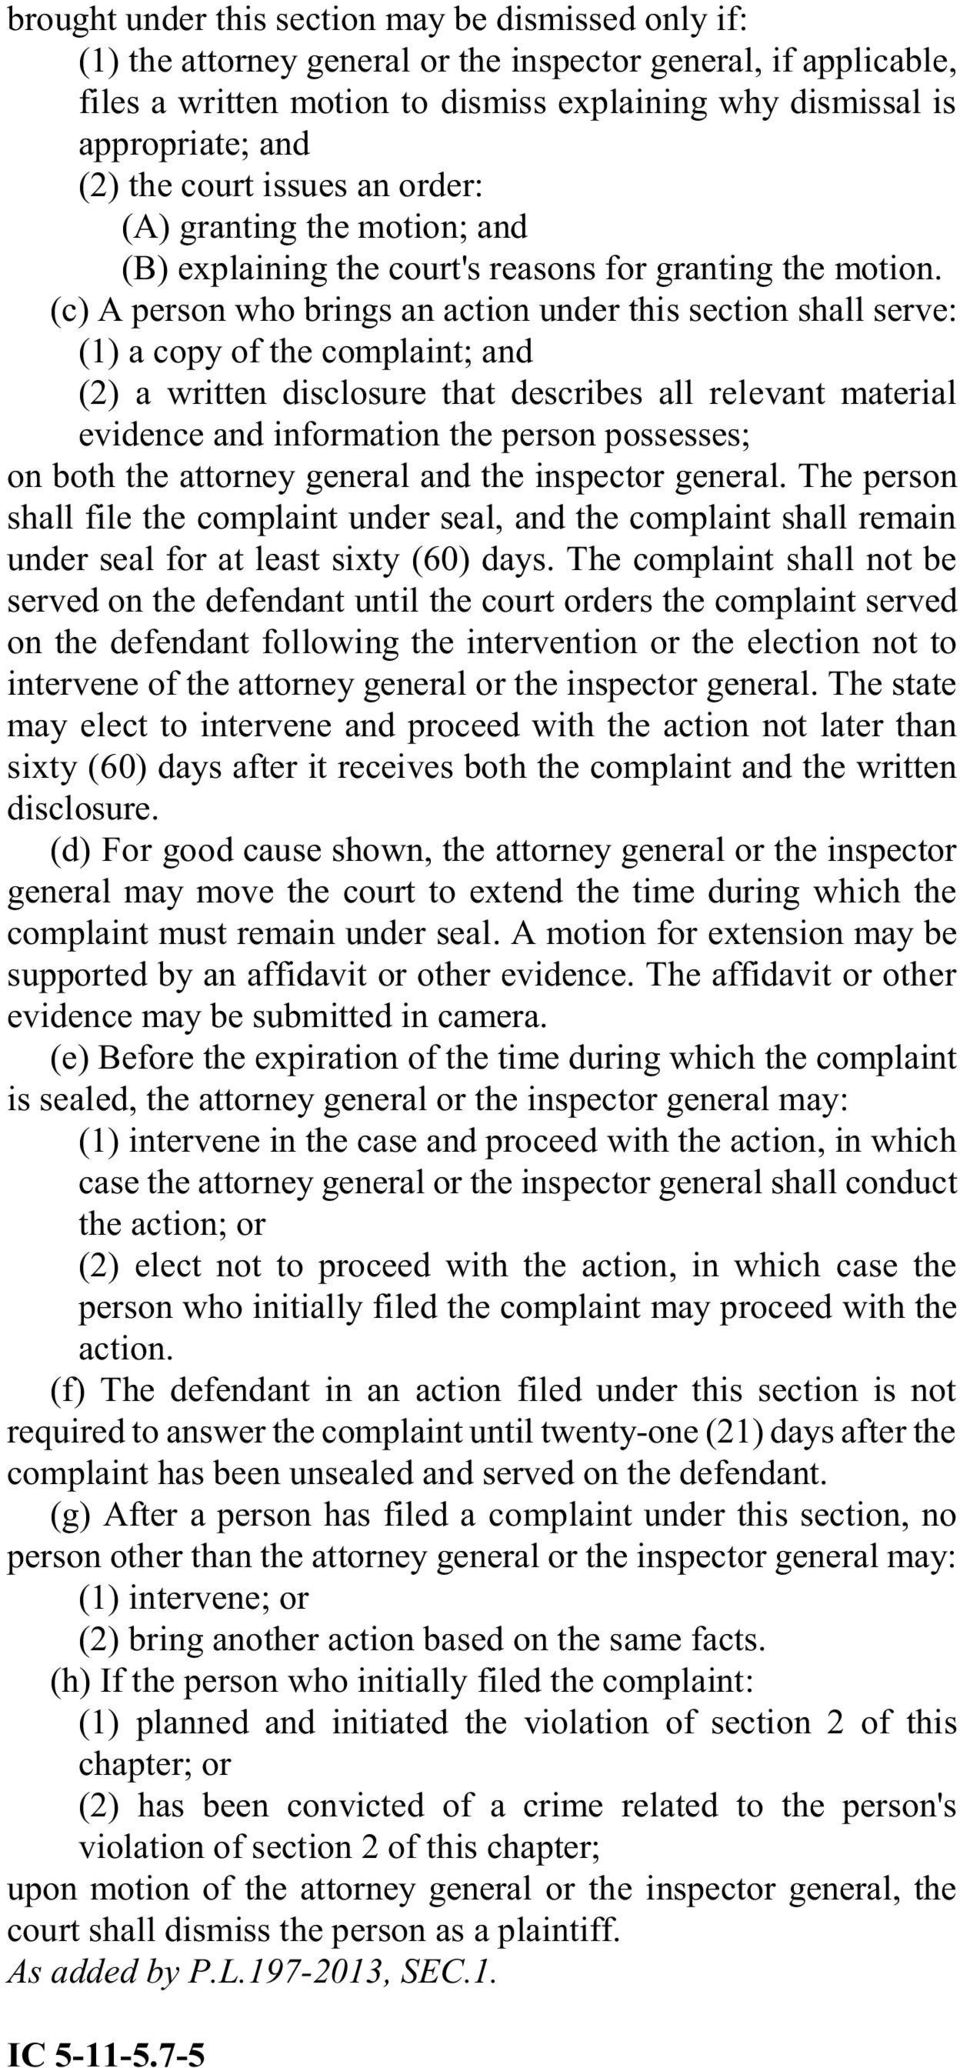 (c) A person who brings an action under this section shall serve: (1) a copy of the complaint; and (2) a written disclosure that describes all relevant material evidence and information the person